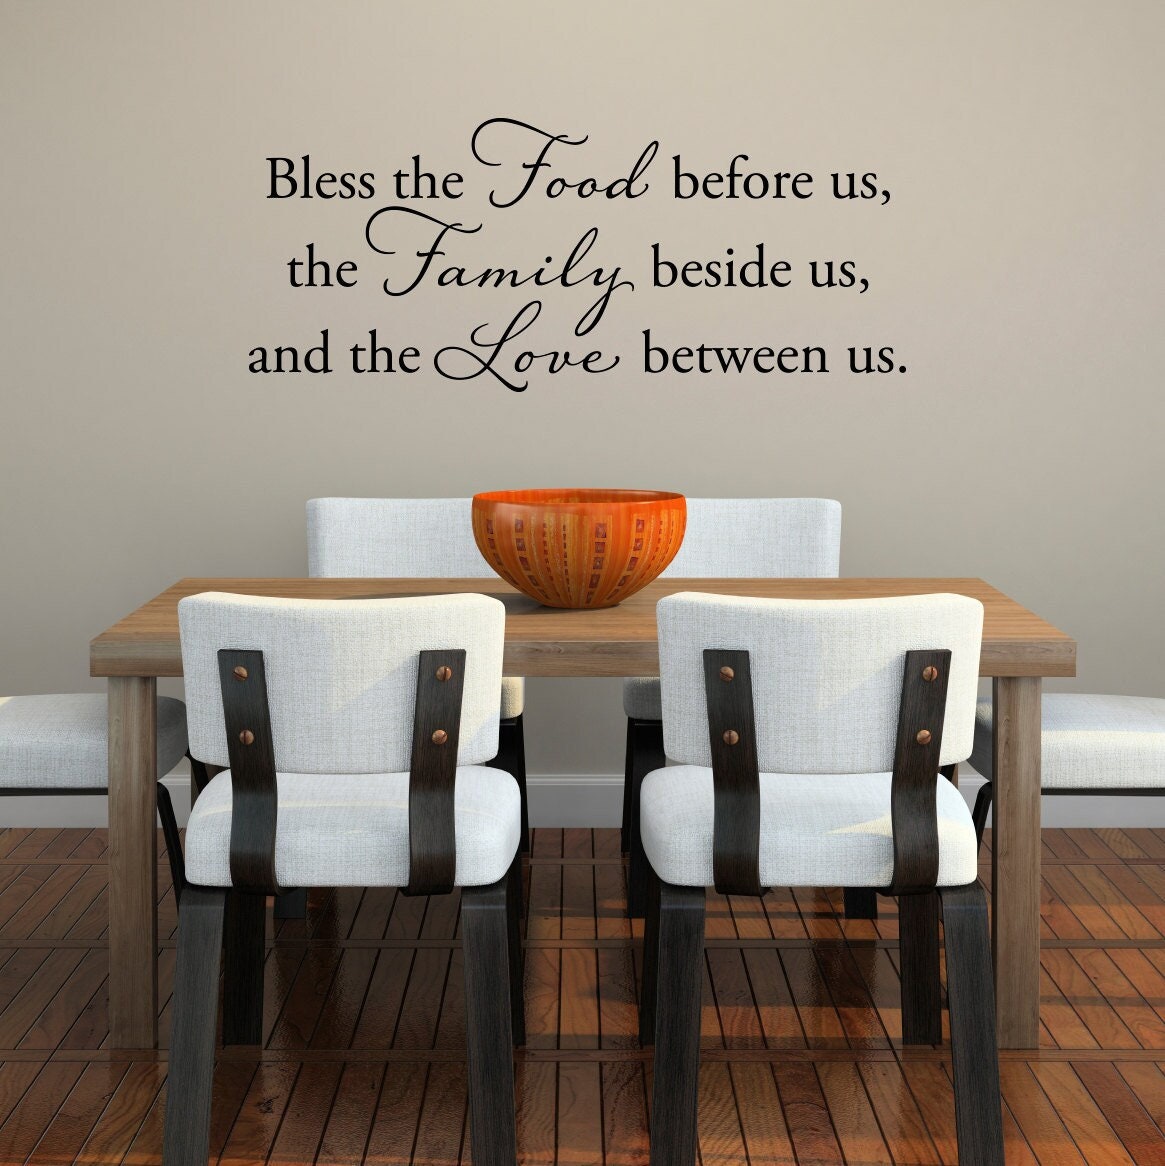 Bless the Food before us Wall Decal | the Family beside us and the Love between us | Dining Room Decor